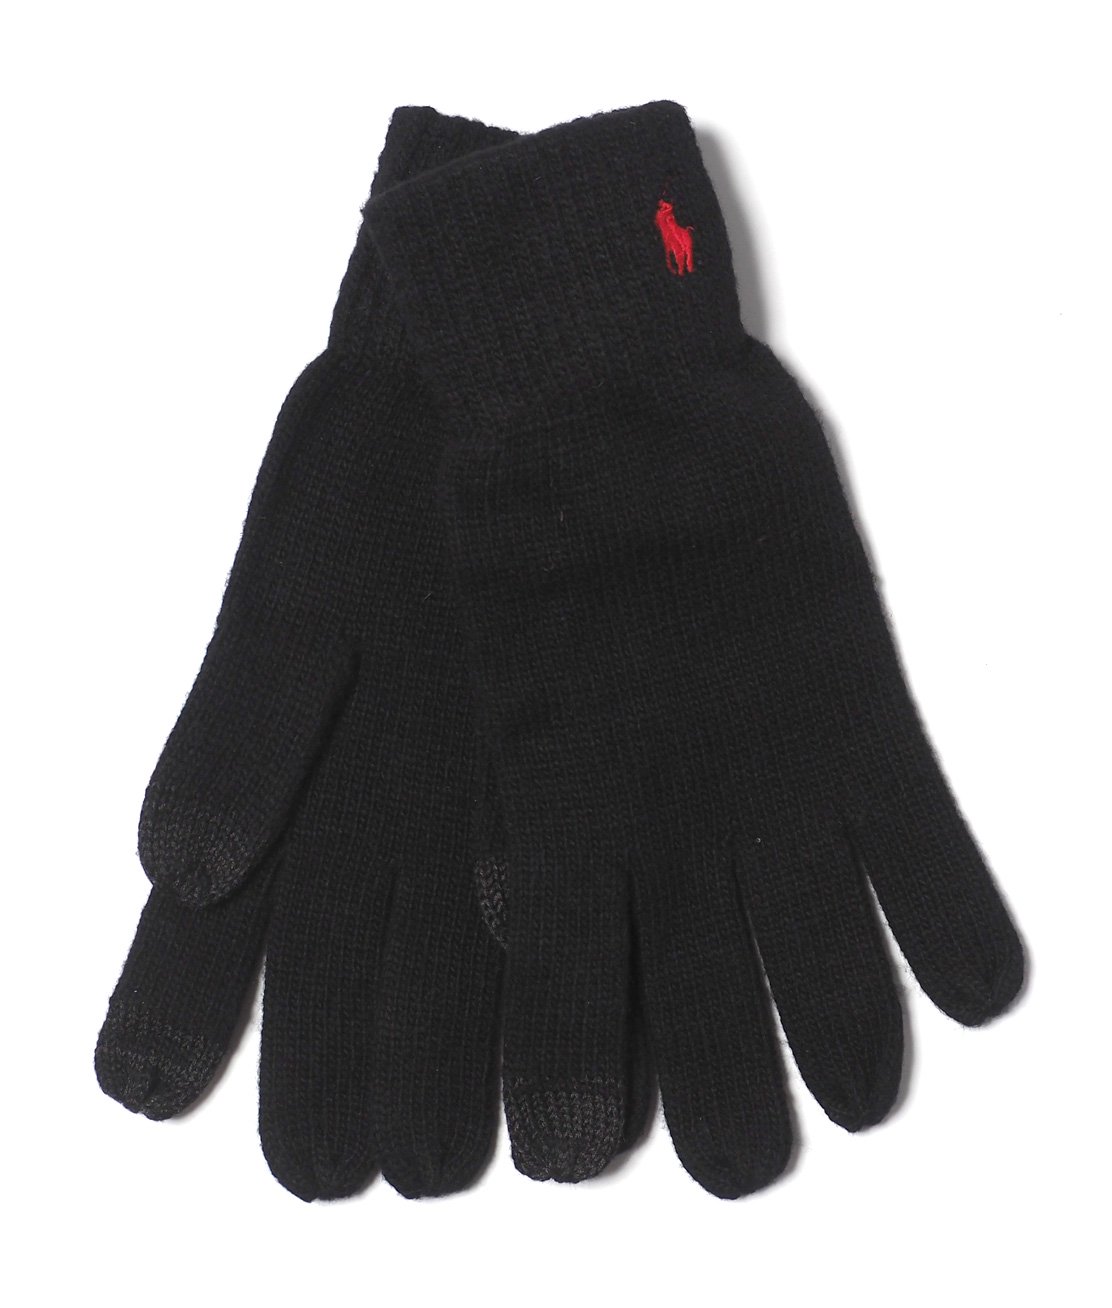 【Ralph Lauren】RECYCLED TOUCH GLOVE - BLACK グローブ 手袋 タッチスクリーン機能 - HUNKY